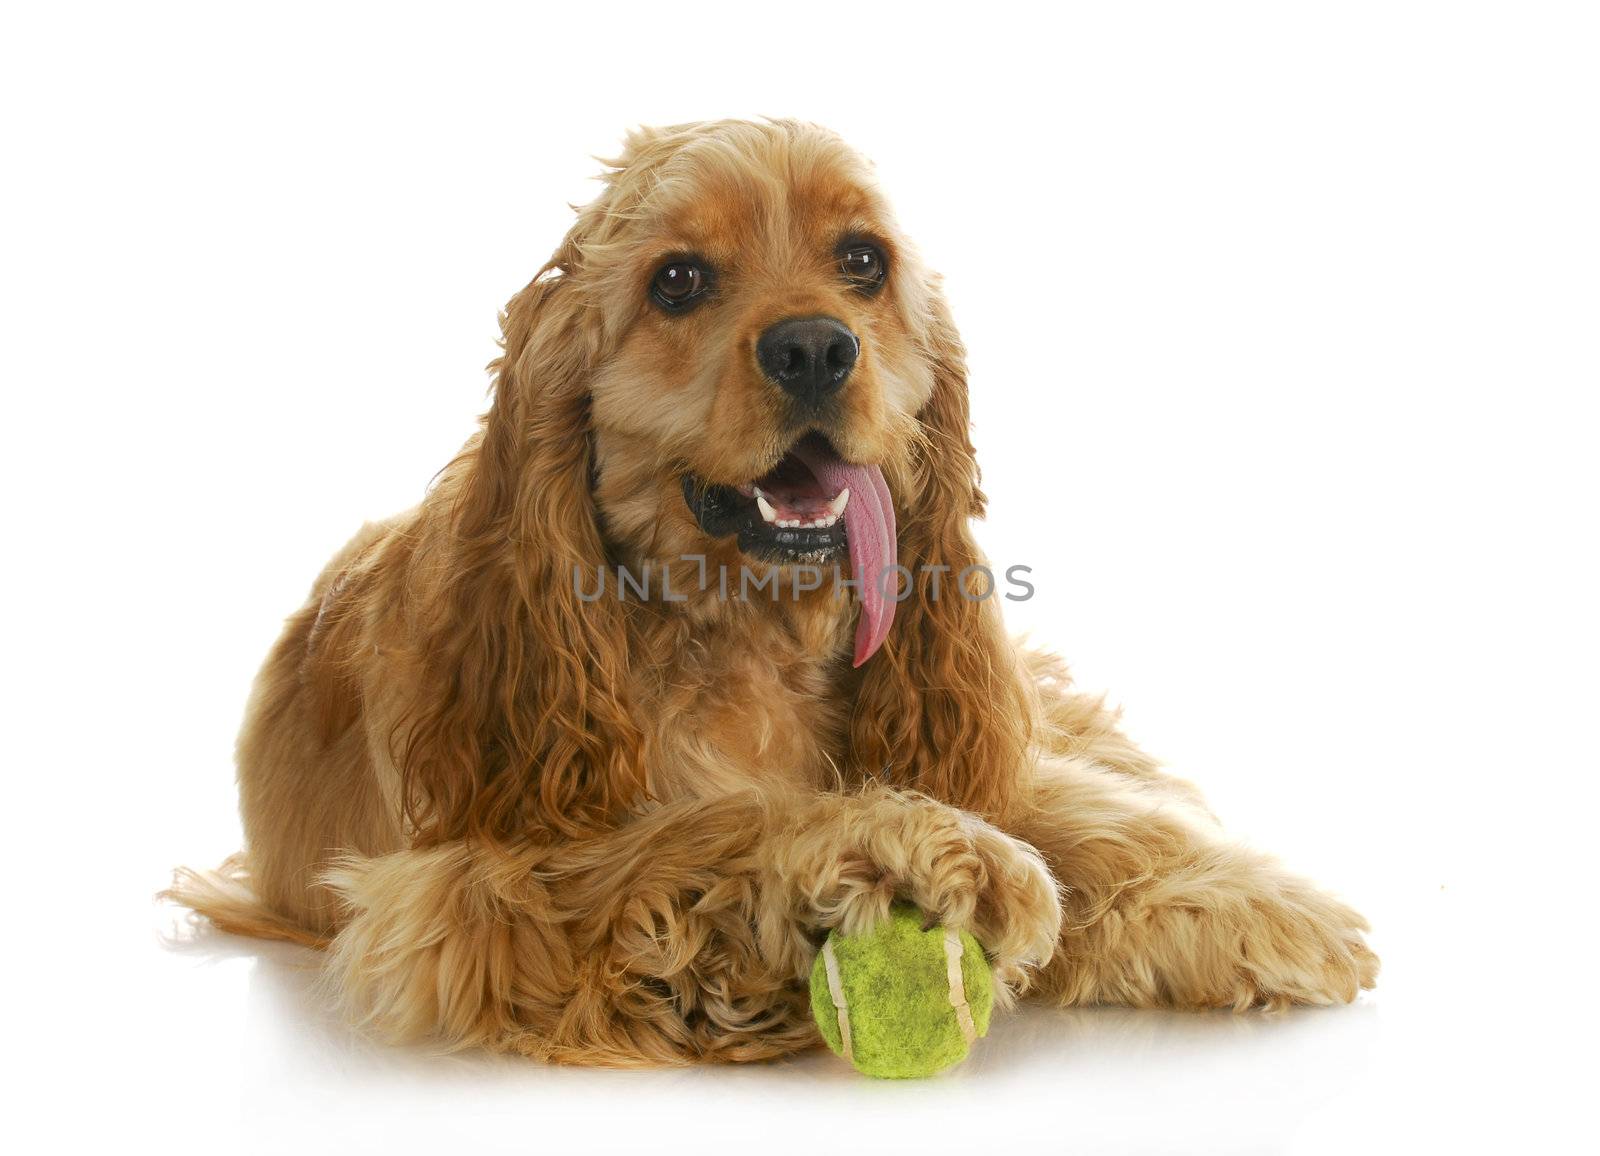 dog playing ball - american cocker spaniel with paw on a tennis ball isolated on white background